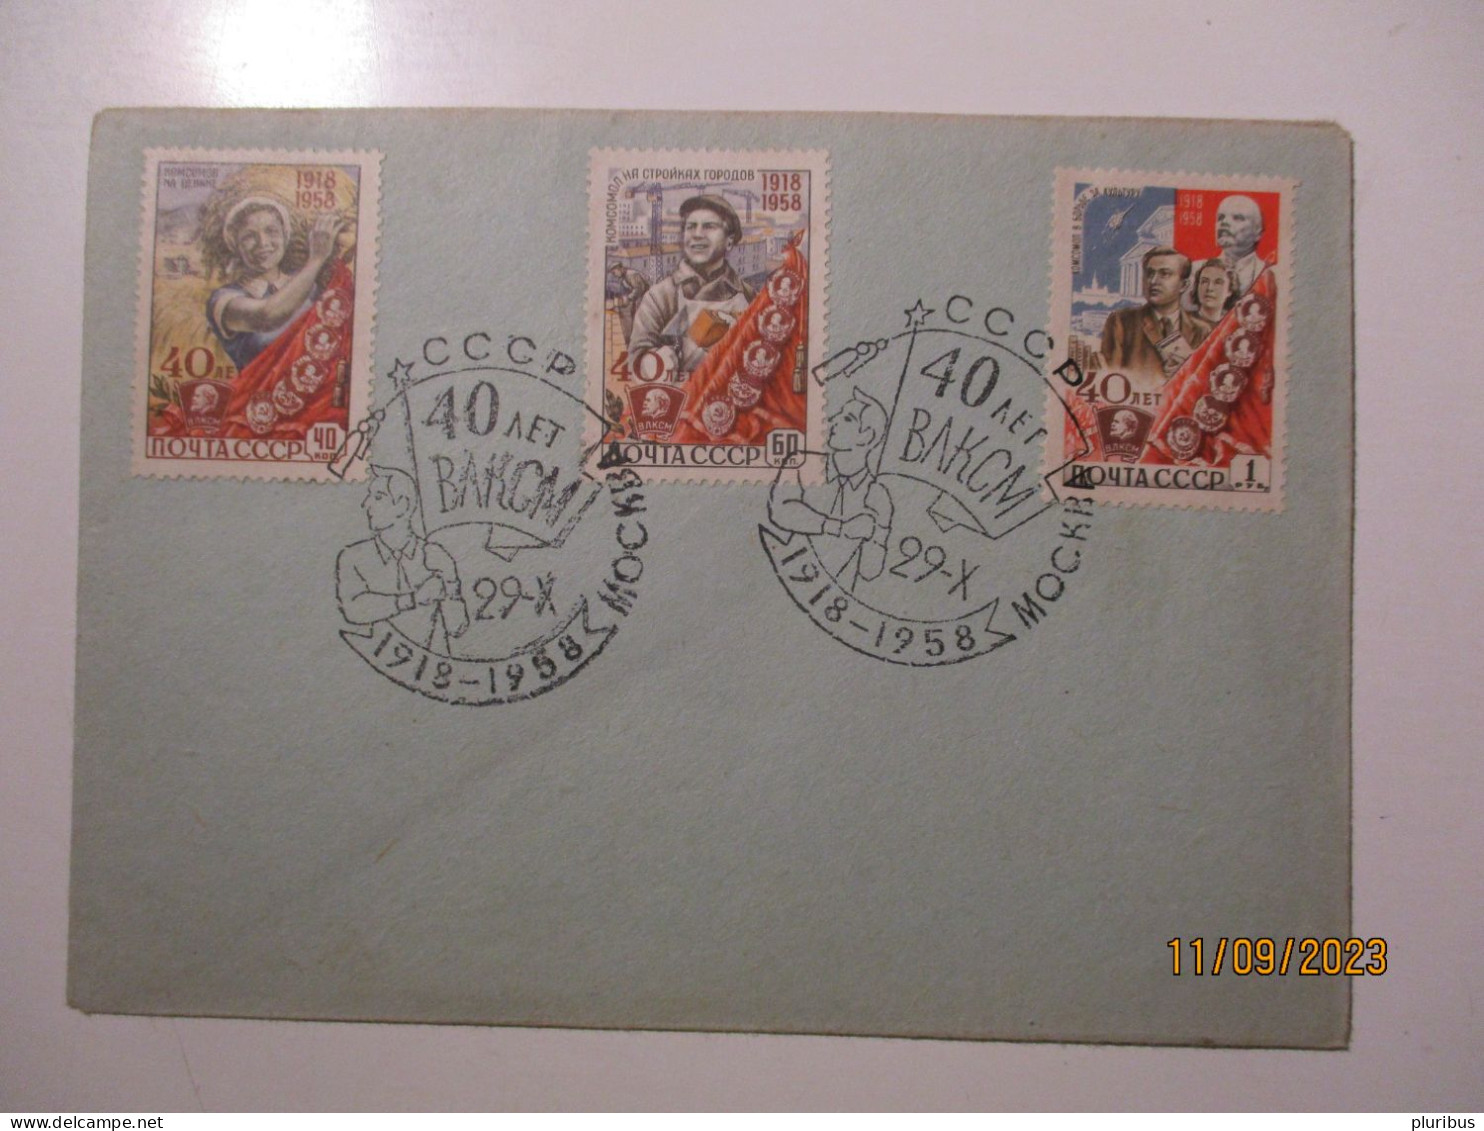 USSR RUSSIA MOSCOW 1958 YOUNG COMMUNIST KOMSOMOL ANNIVERSARY  ,   SPECIAL CANCEL COVER   , O - Storia Postale